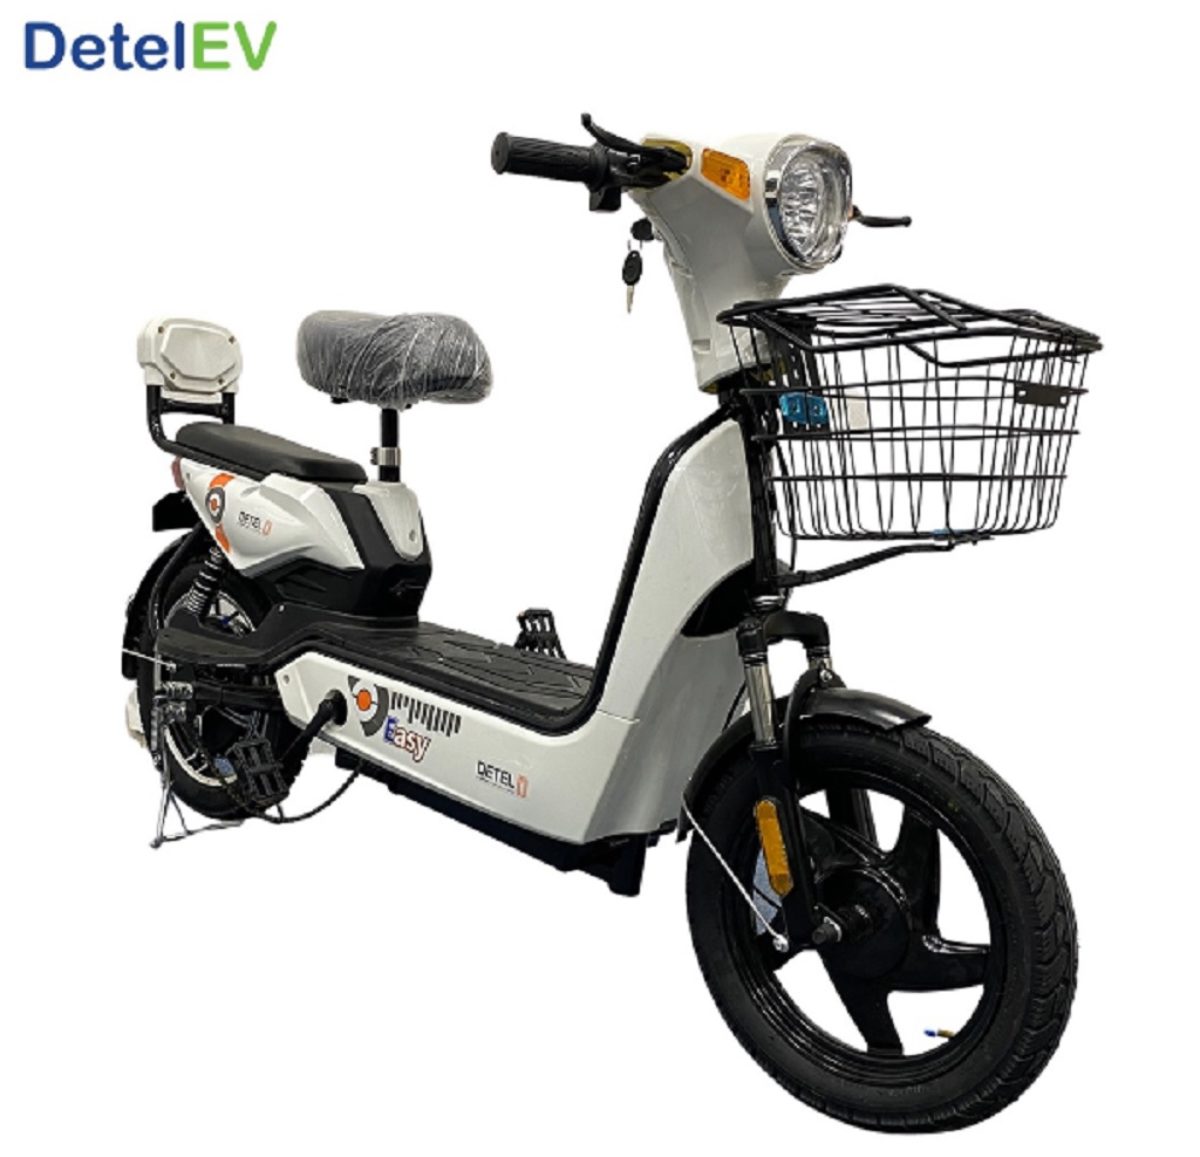 Detel Easy EV Price Fixed At Rs. 20,000 